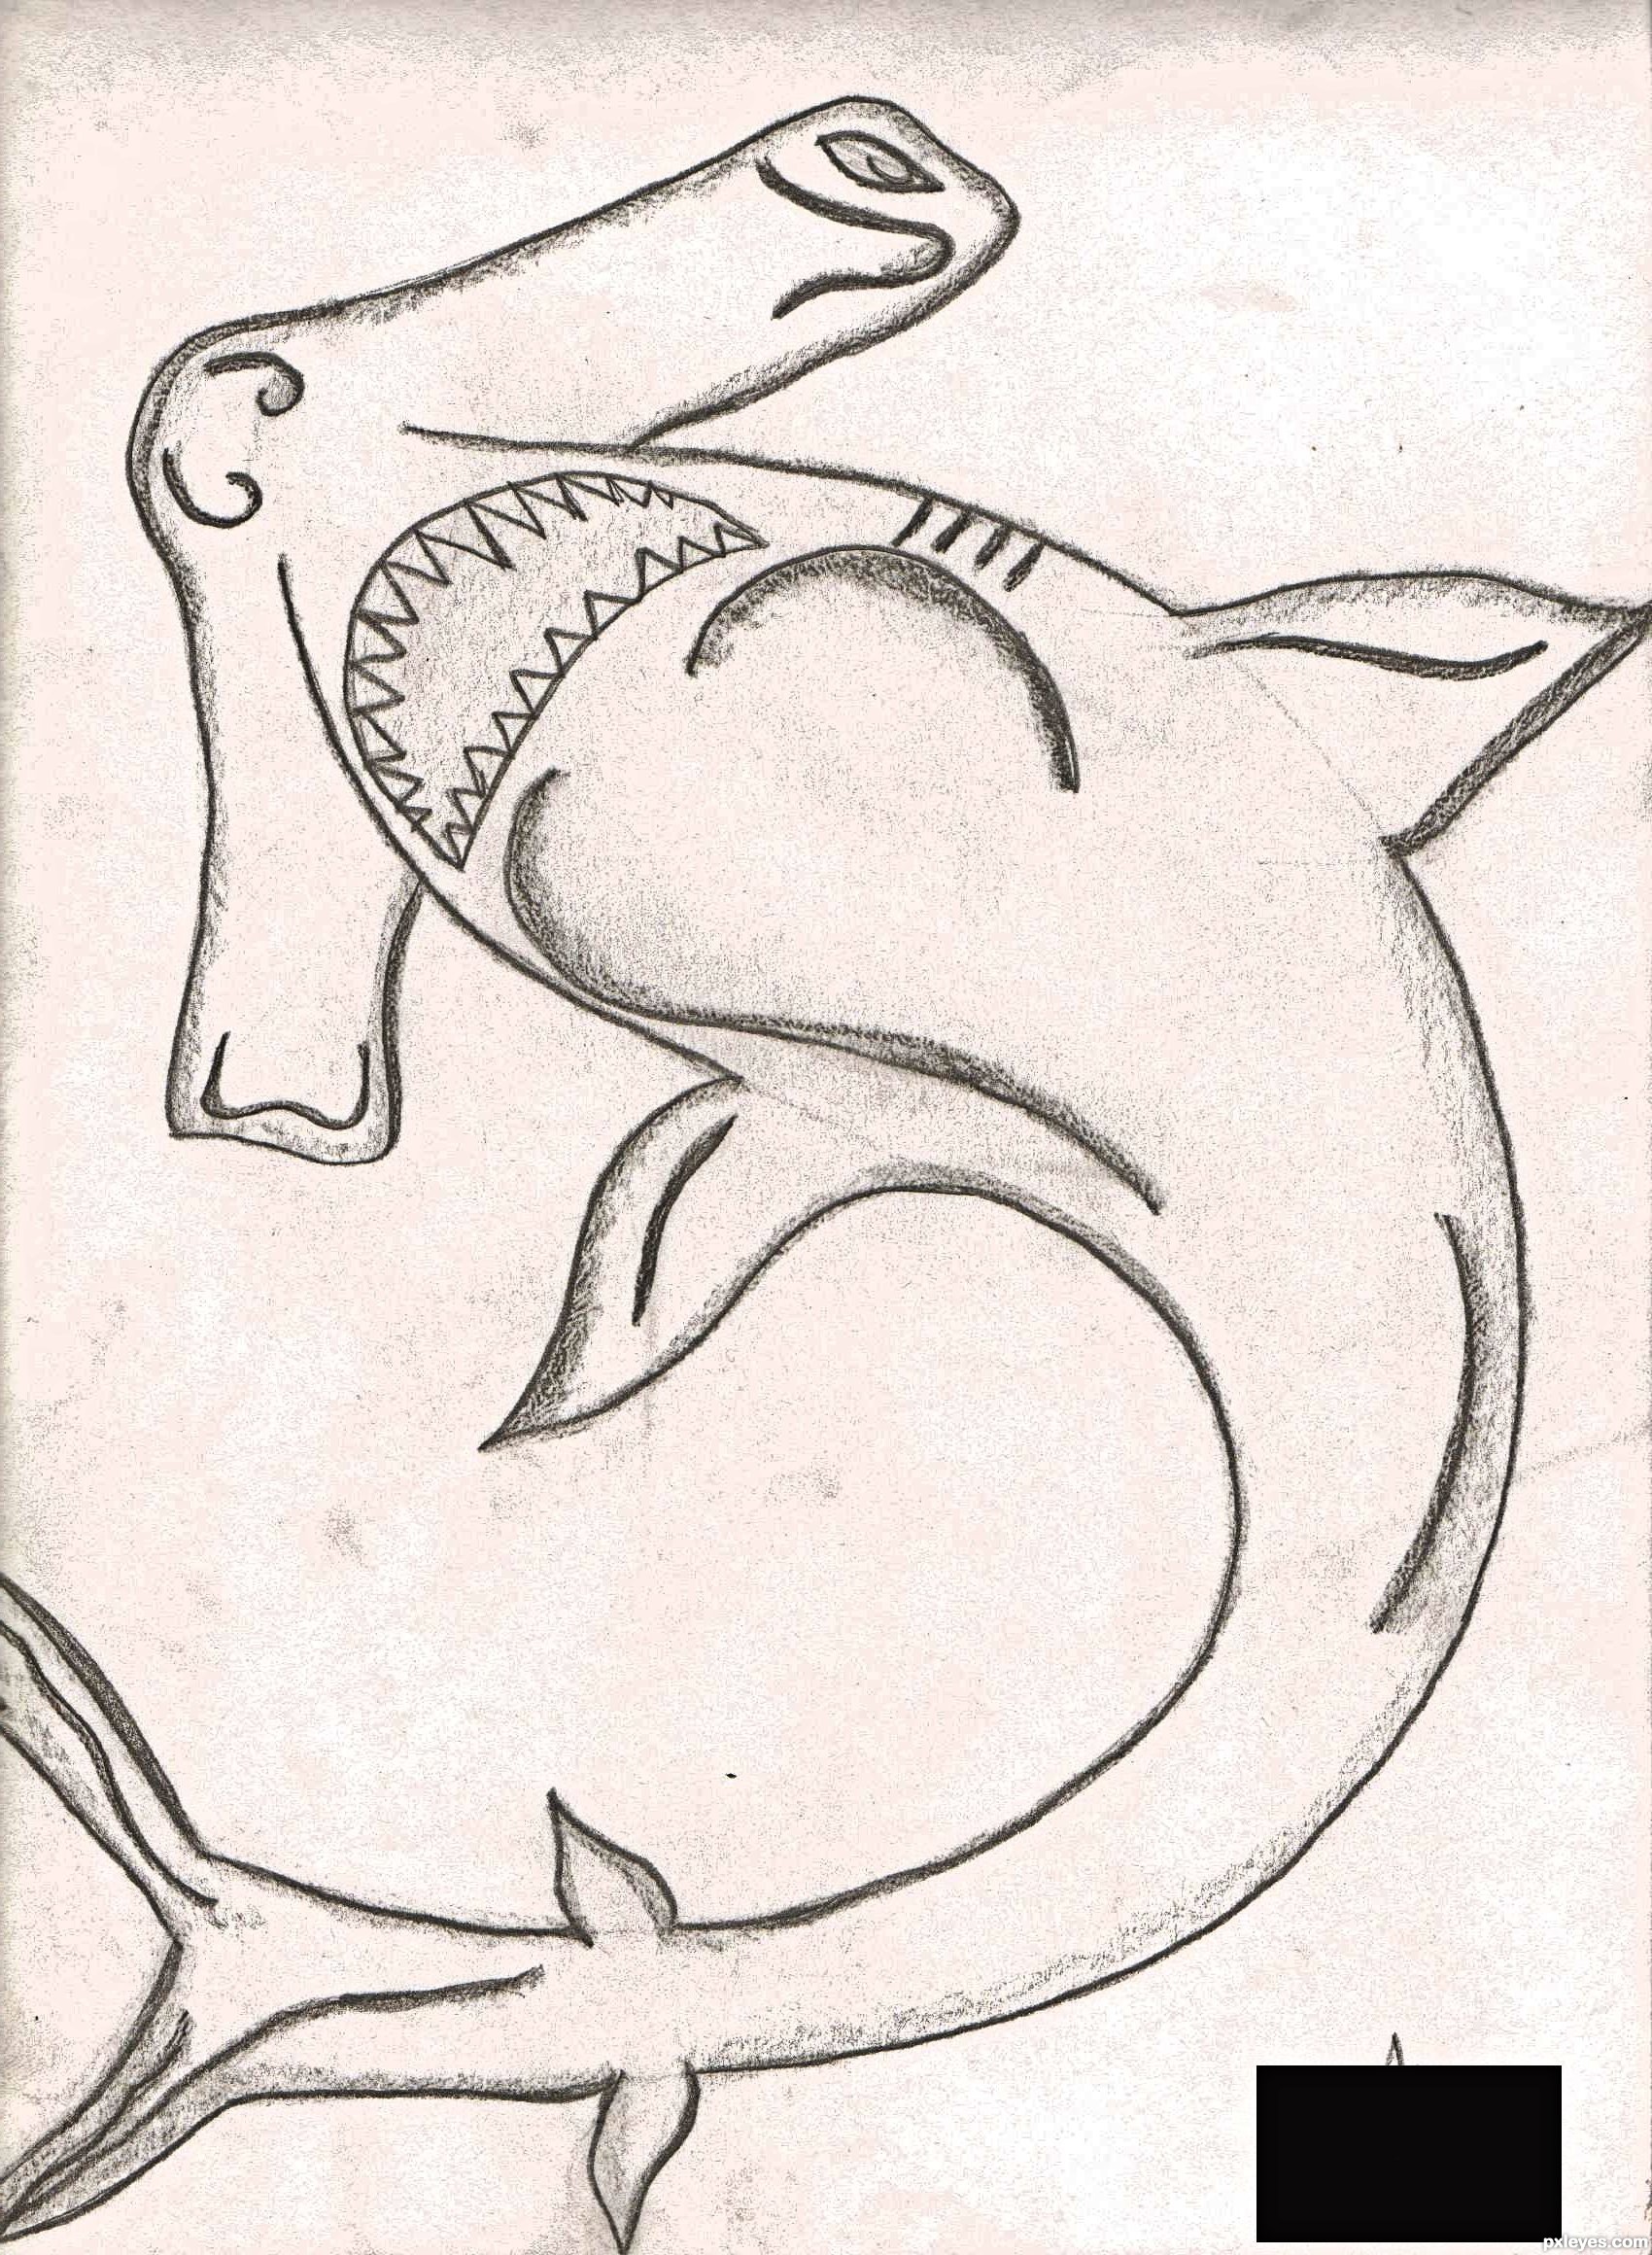 Shark! picture, by JoeCacia for: sea creatures drawing contest